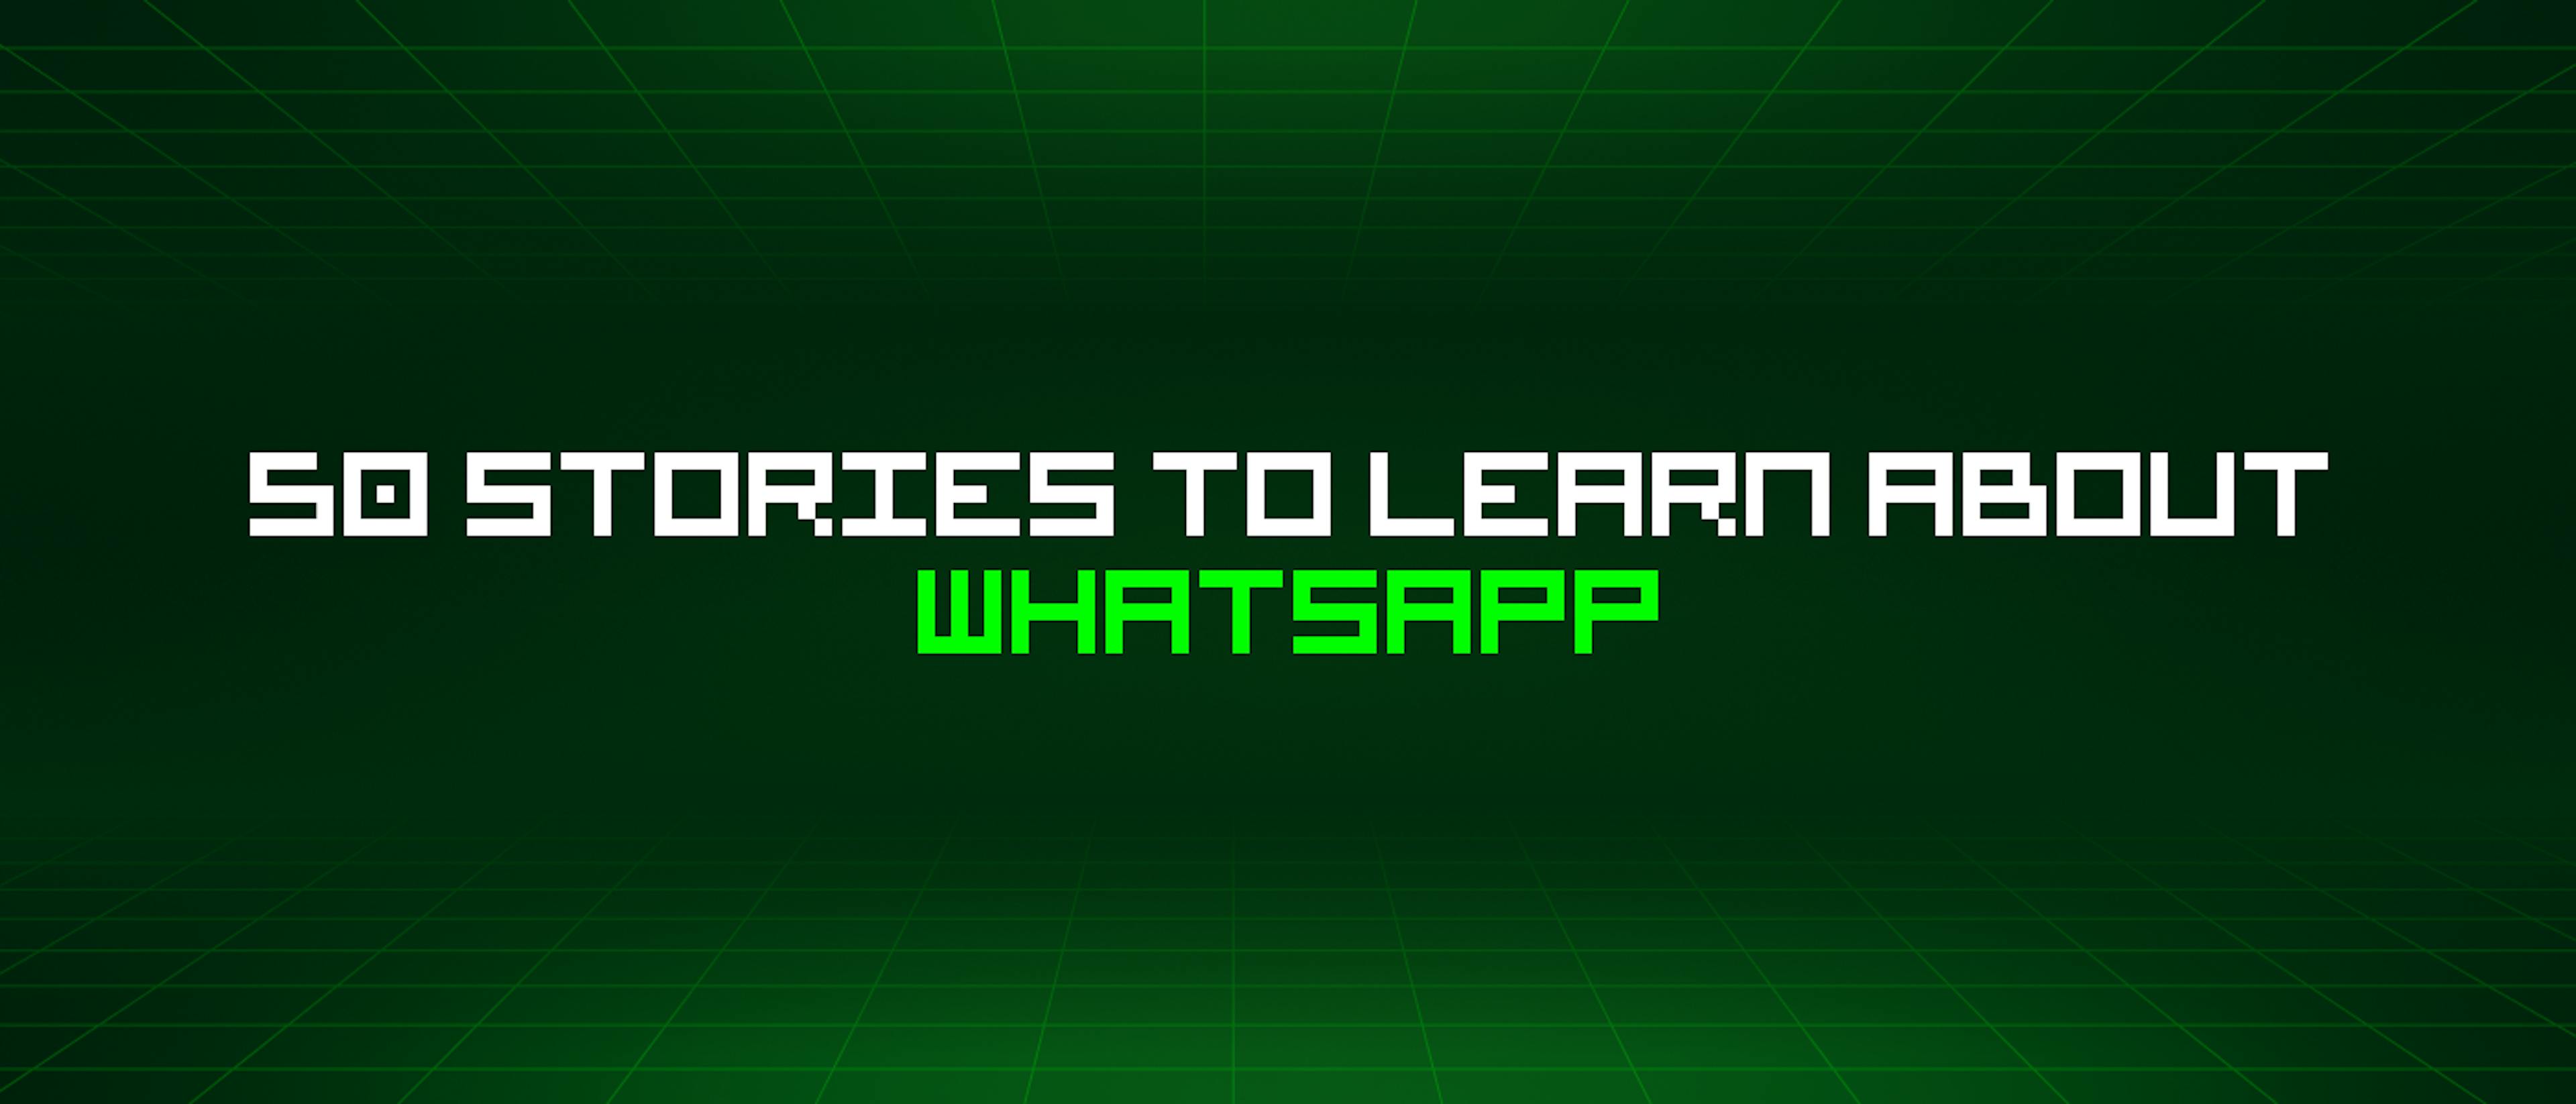 featured image - 50 Stories To Learn About Whatsapp